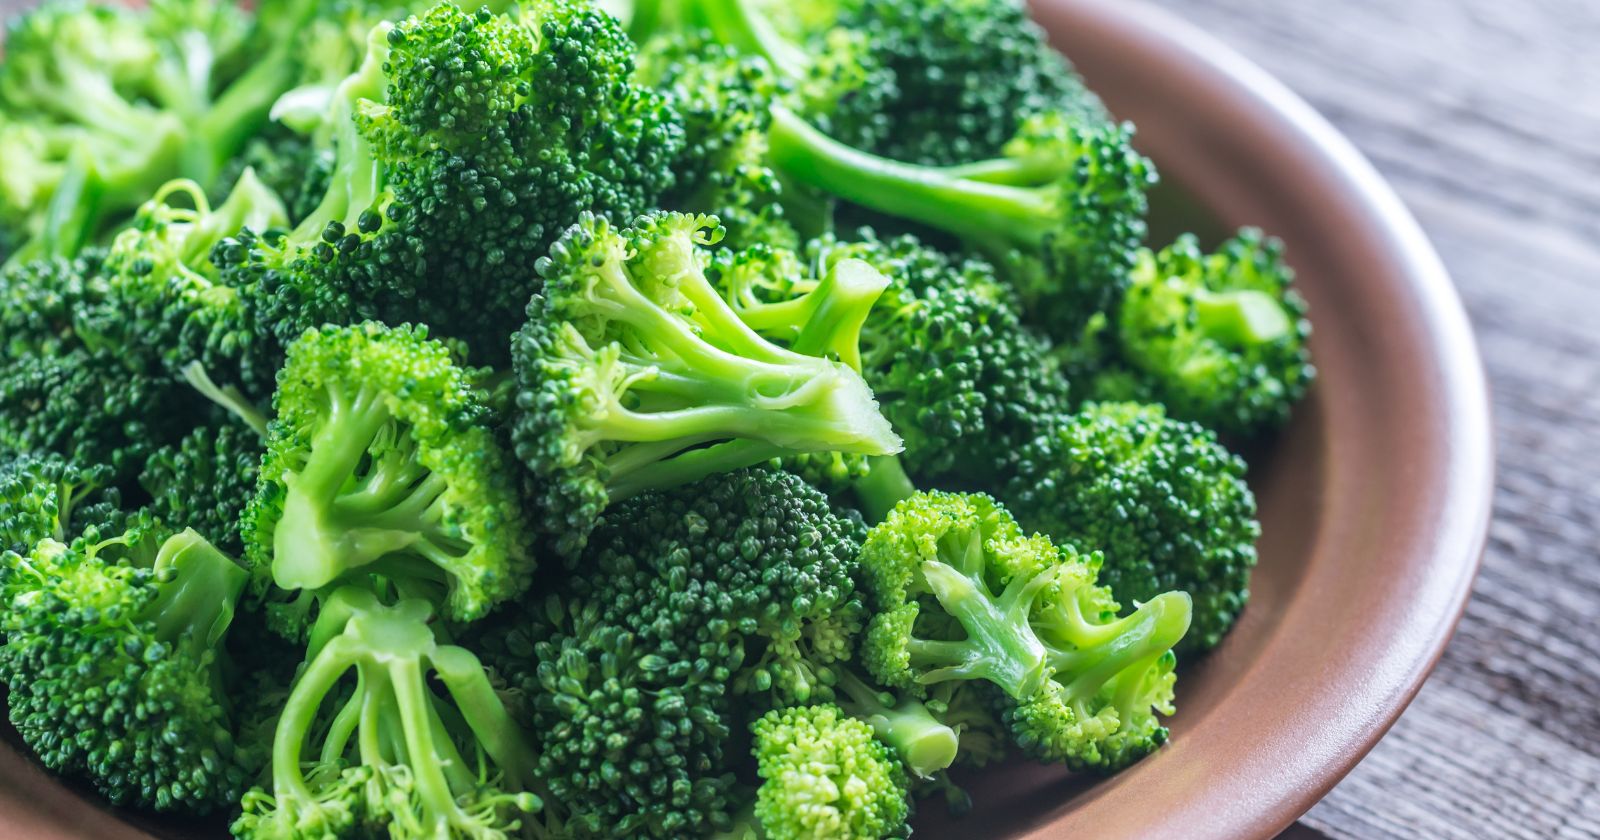 Benefits Of Broccoli For The Elderly